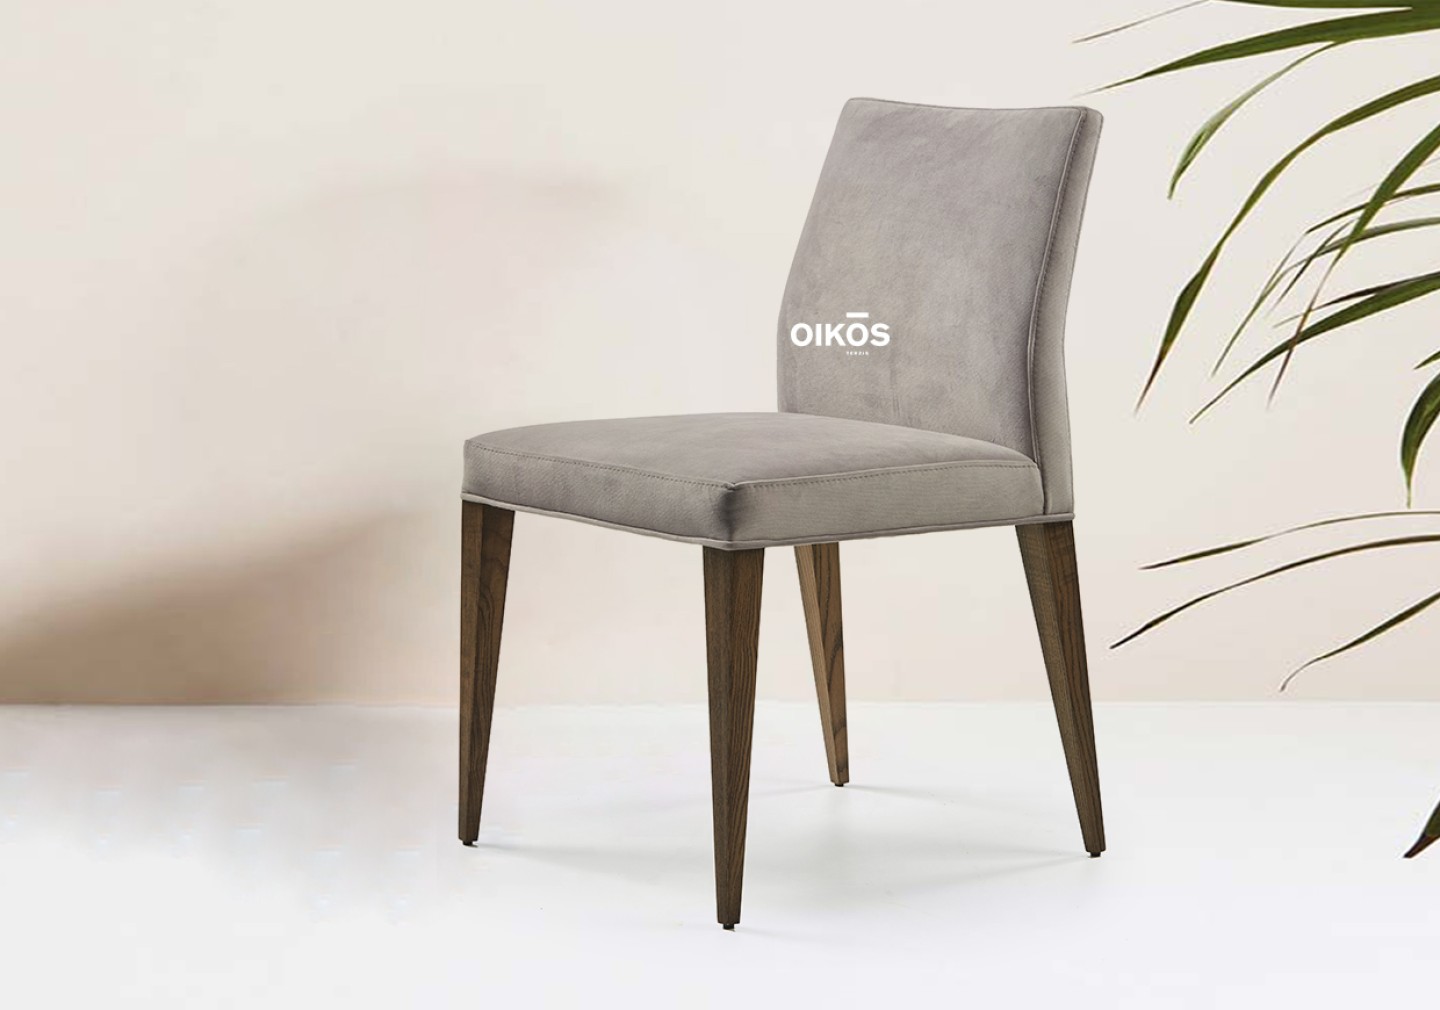 THE ELODIE DINING CHAIR